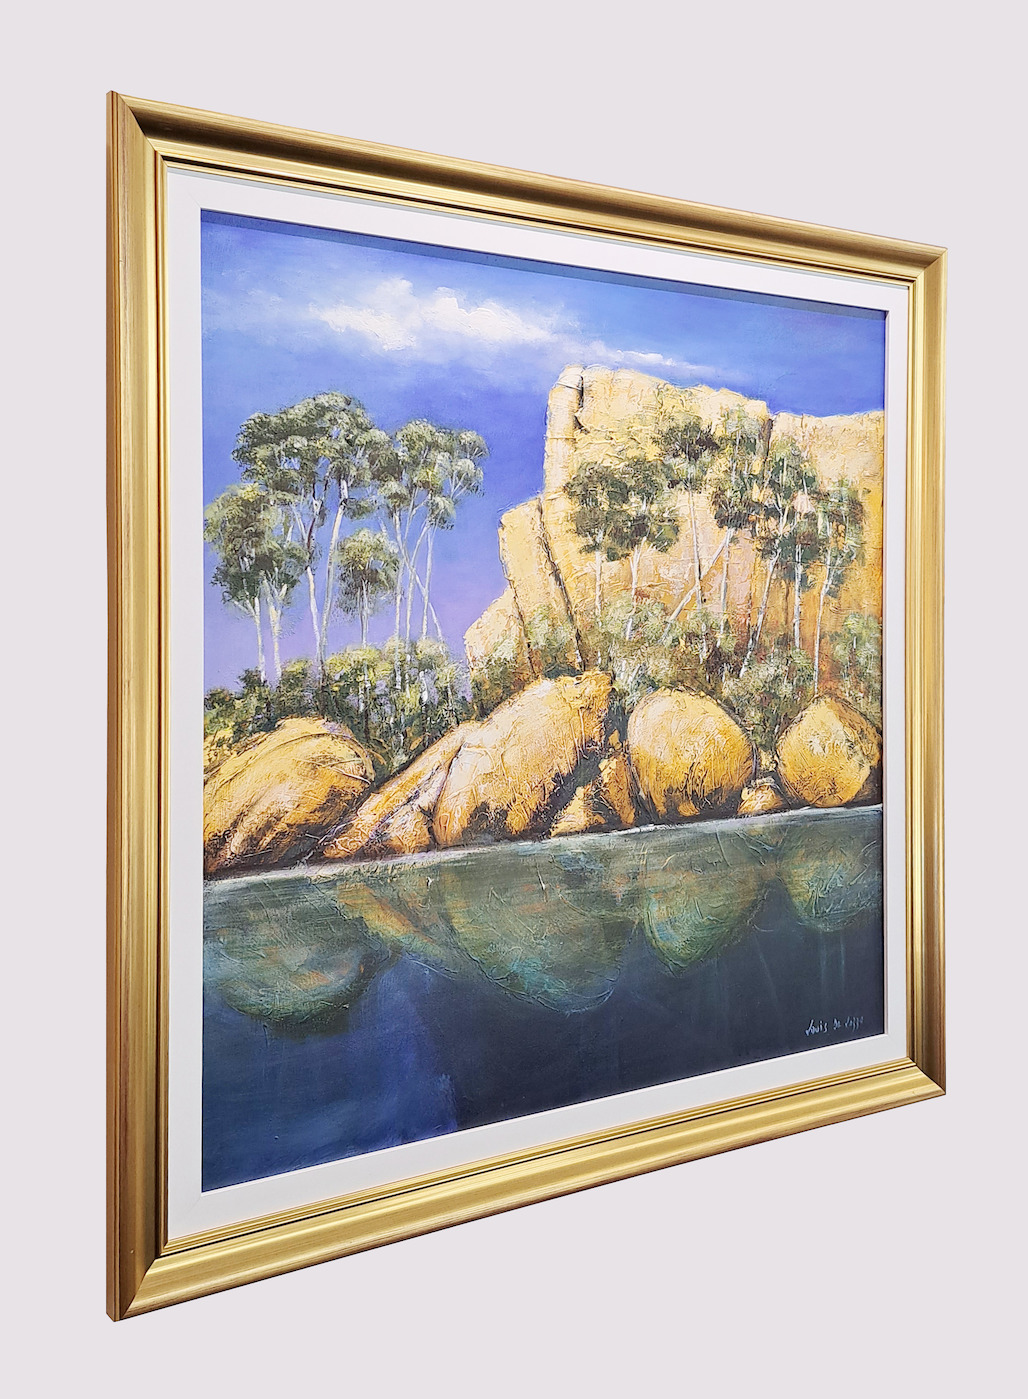 Framed Side View Of Landscape Painting "Carnarvon Gorge Central QLD" By Louis Dalozzo